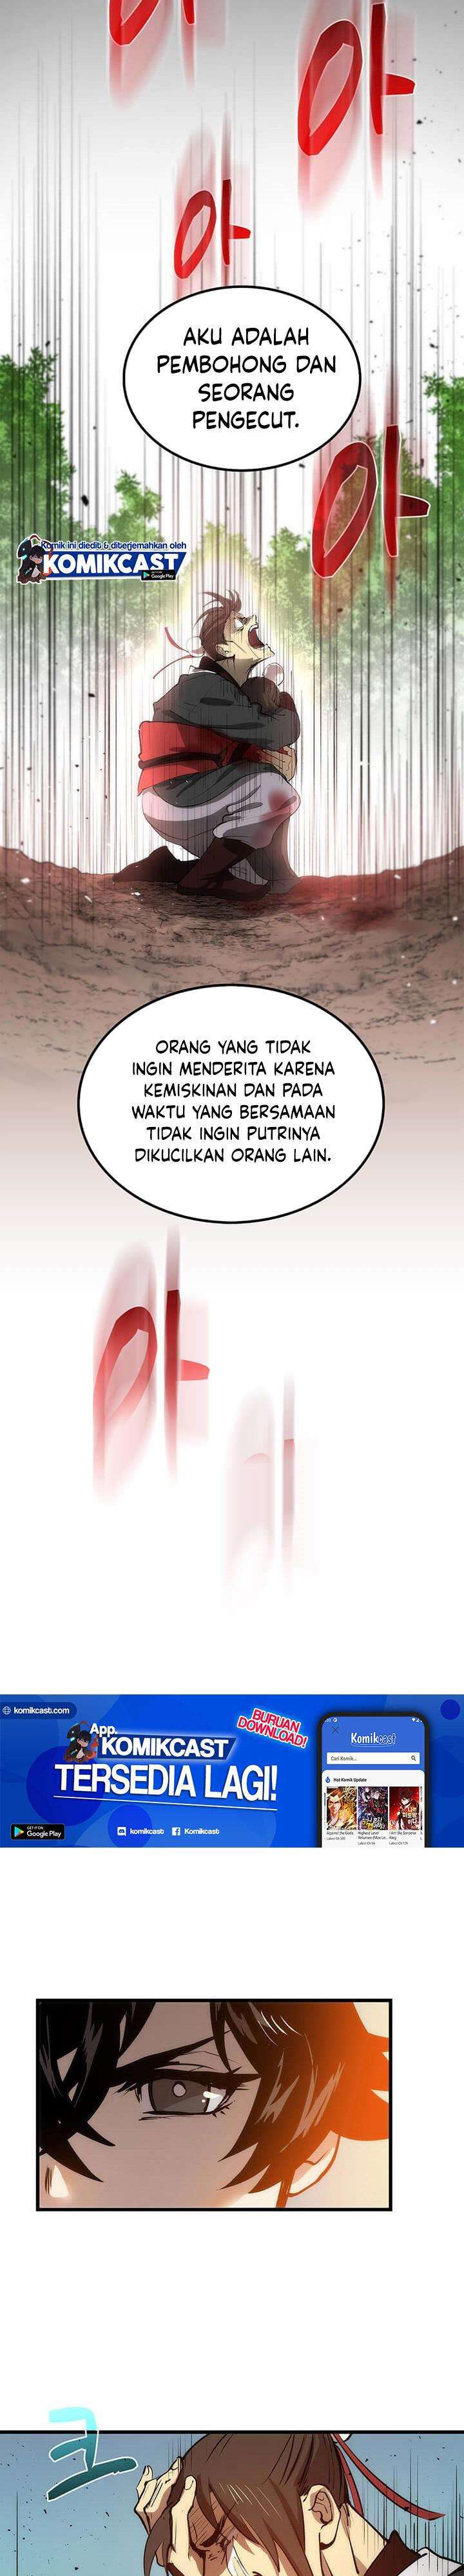 Doctor’s Rebirth Chapter 23